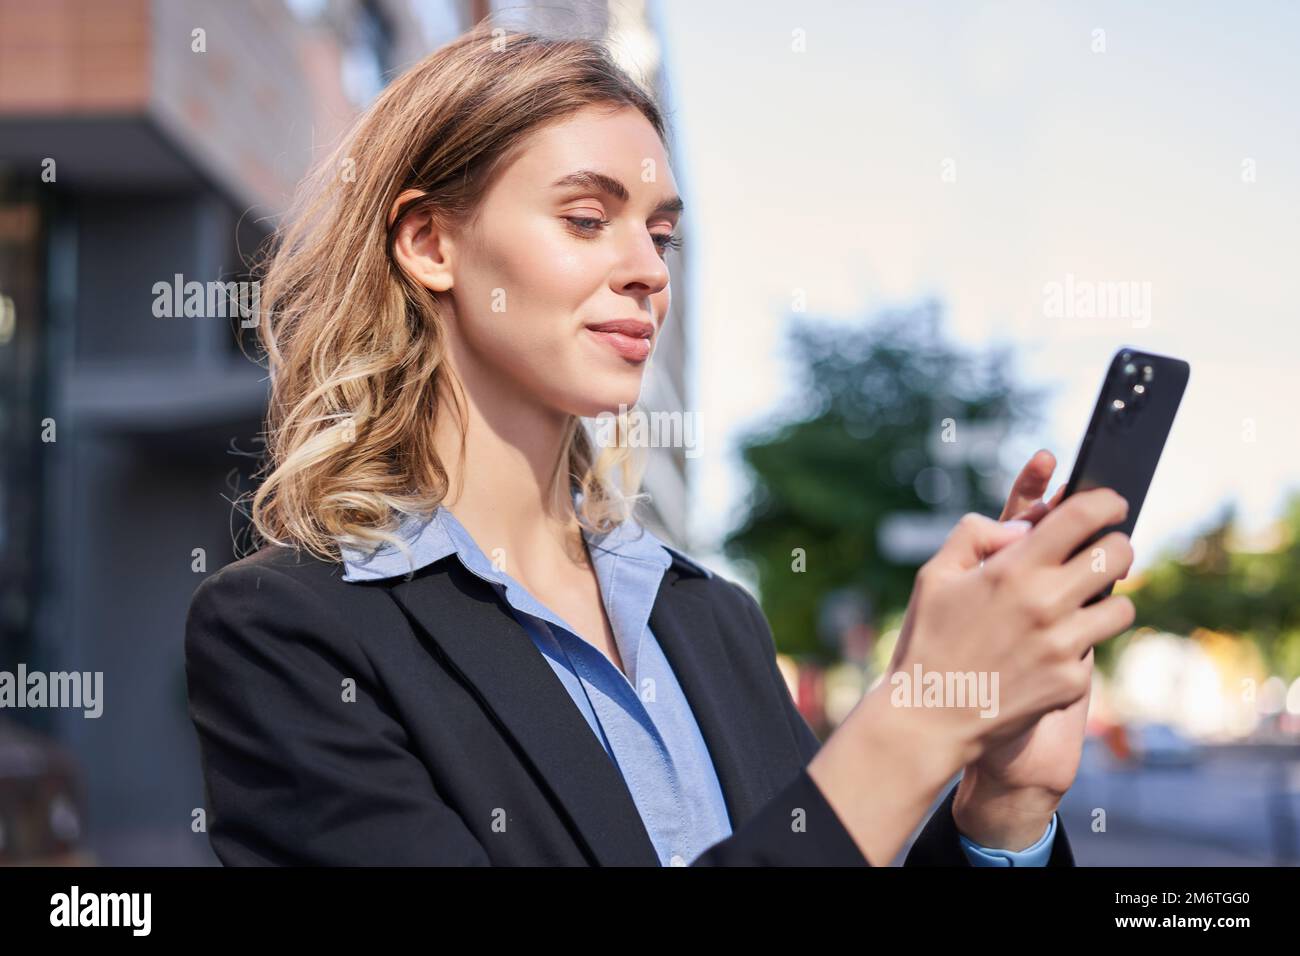 Corporate woman stands on street and texts message on mobile phone, smiling while looking at smartphone screen Stock Photo